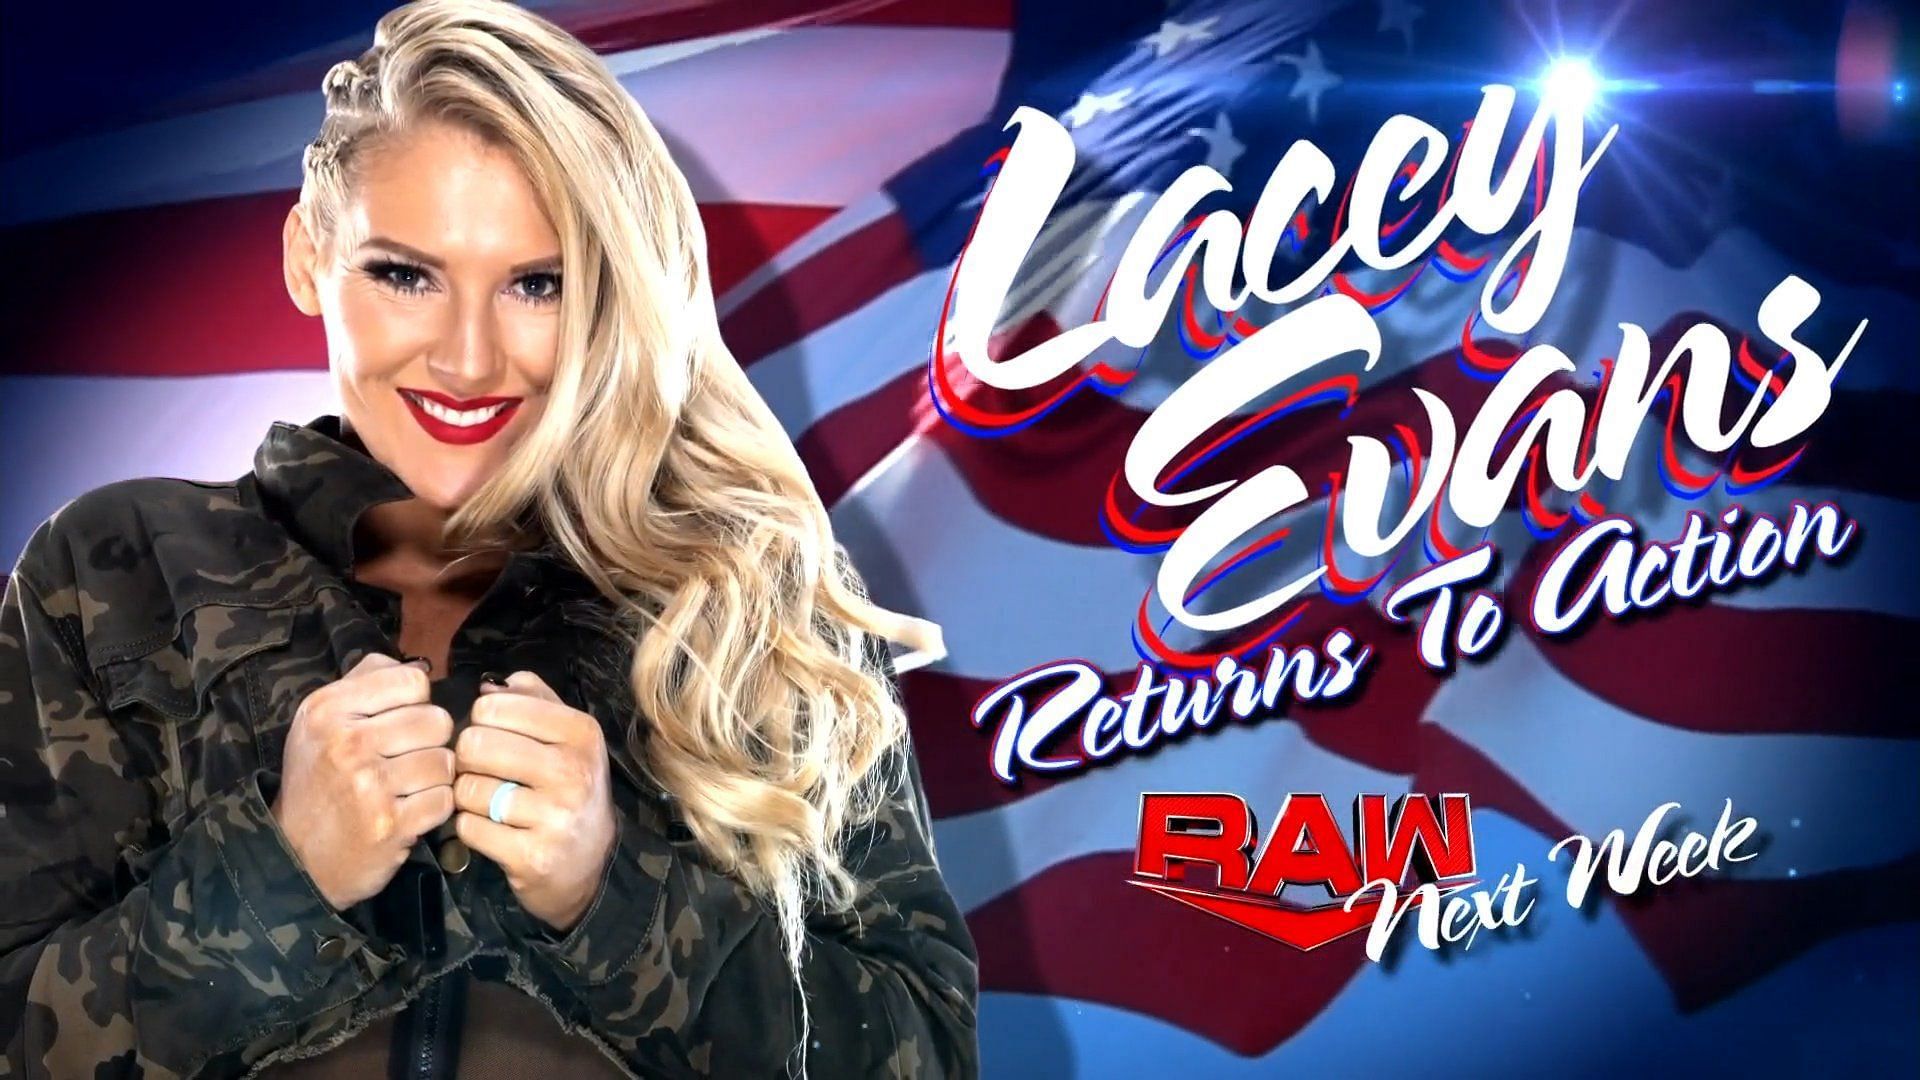 Lacey Evans will return to in-ring competition next week on WWE RAW